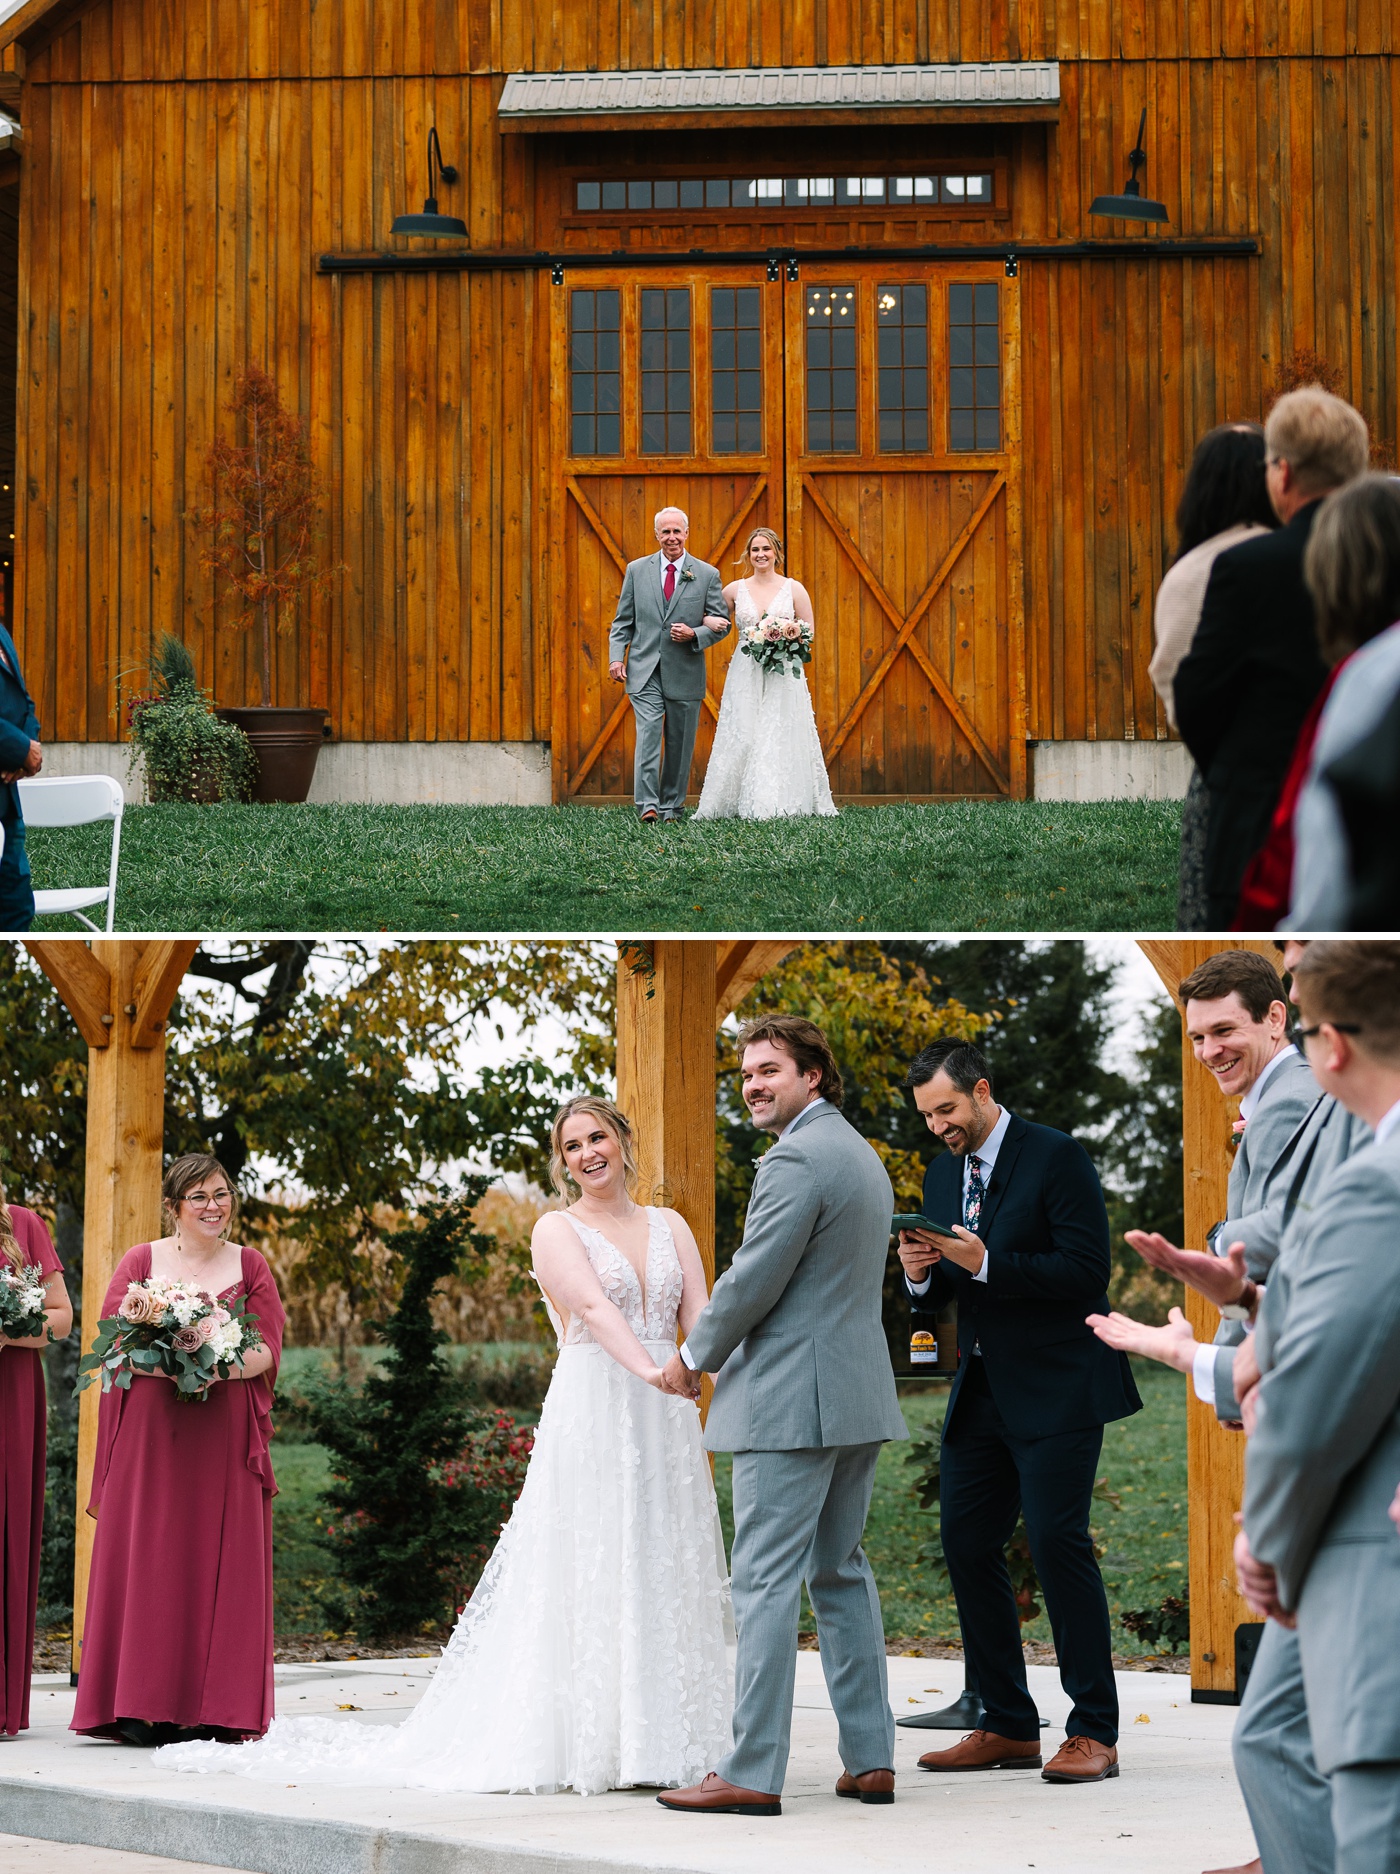 Fall outdoor wedding ceremony at Whippoorwill Hill